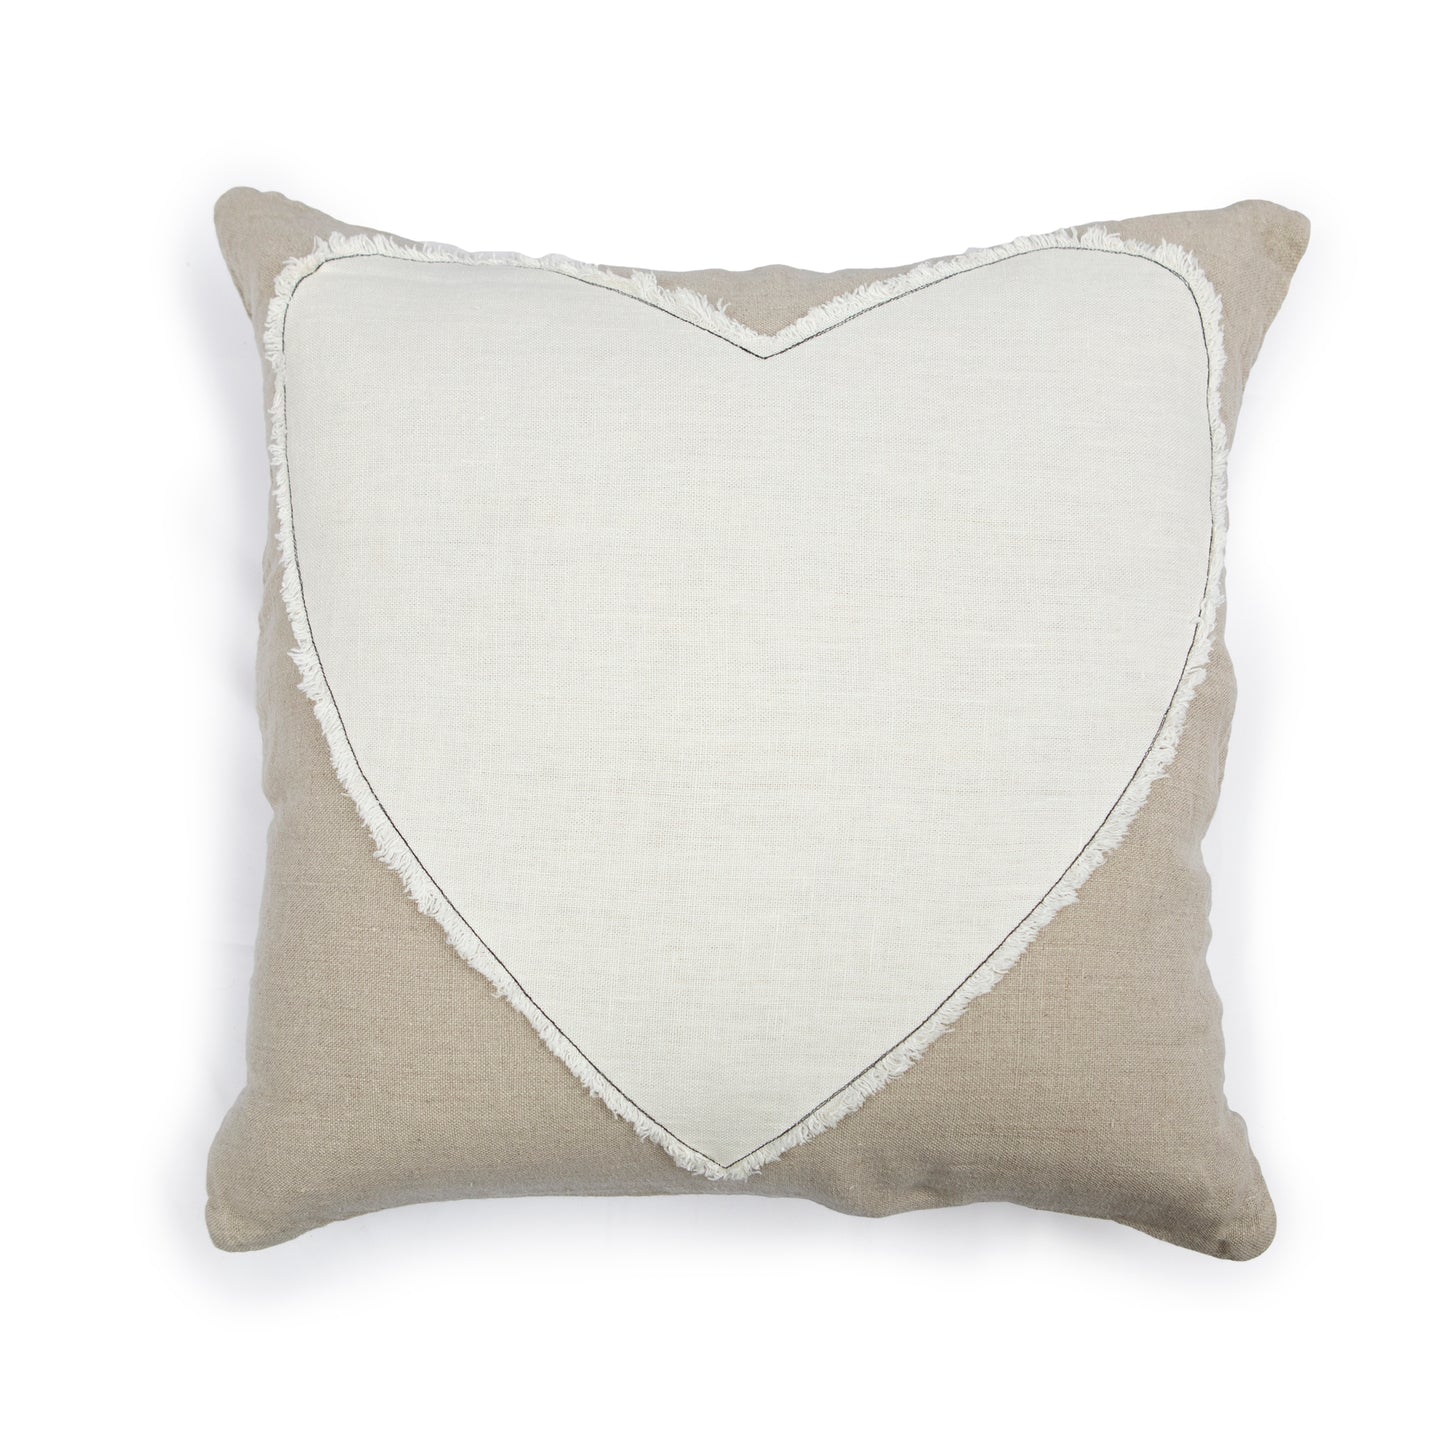 Heart Stitched Pillow